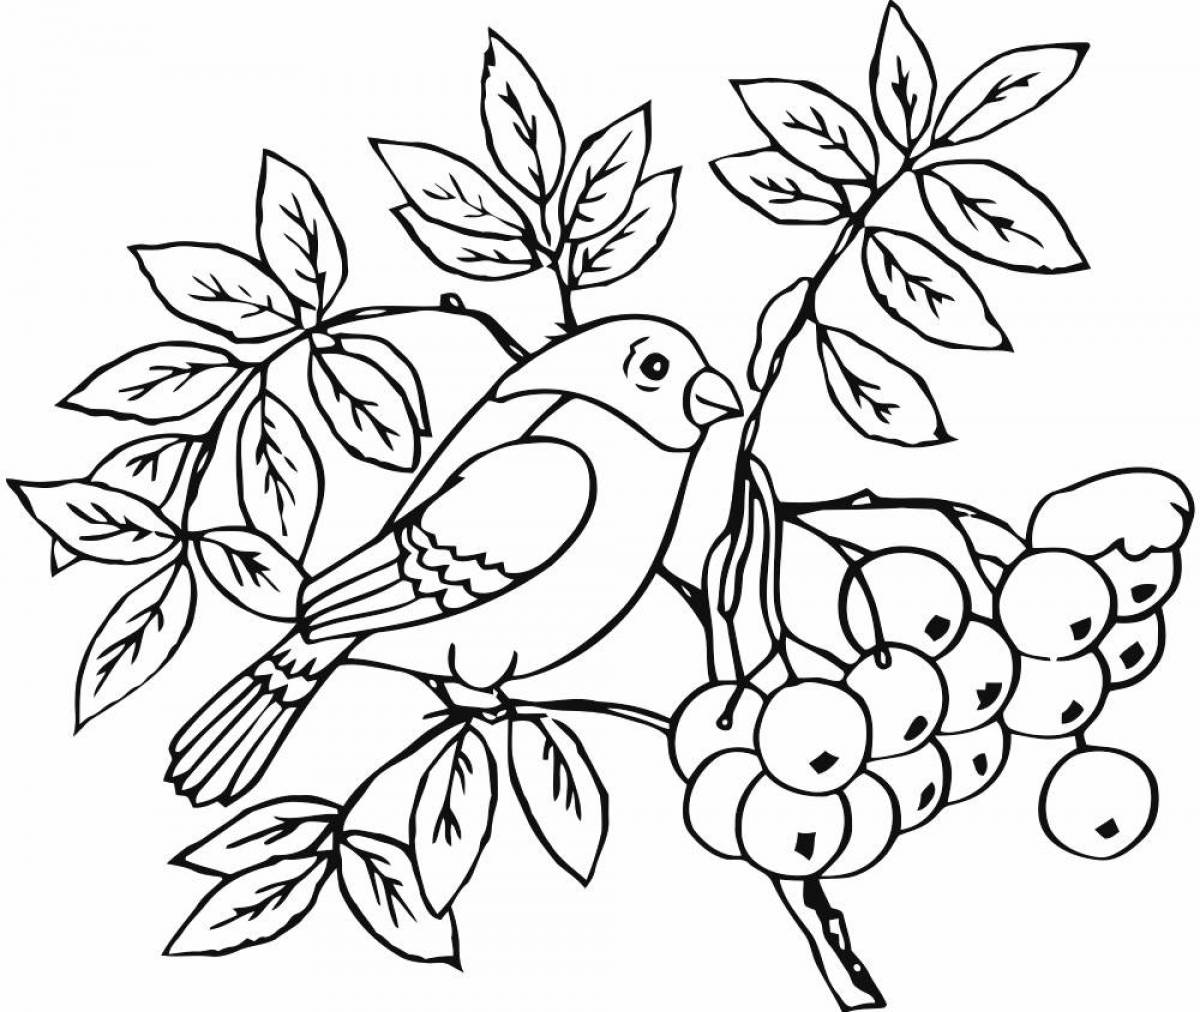 Coloring book with bullfinch print